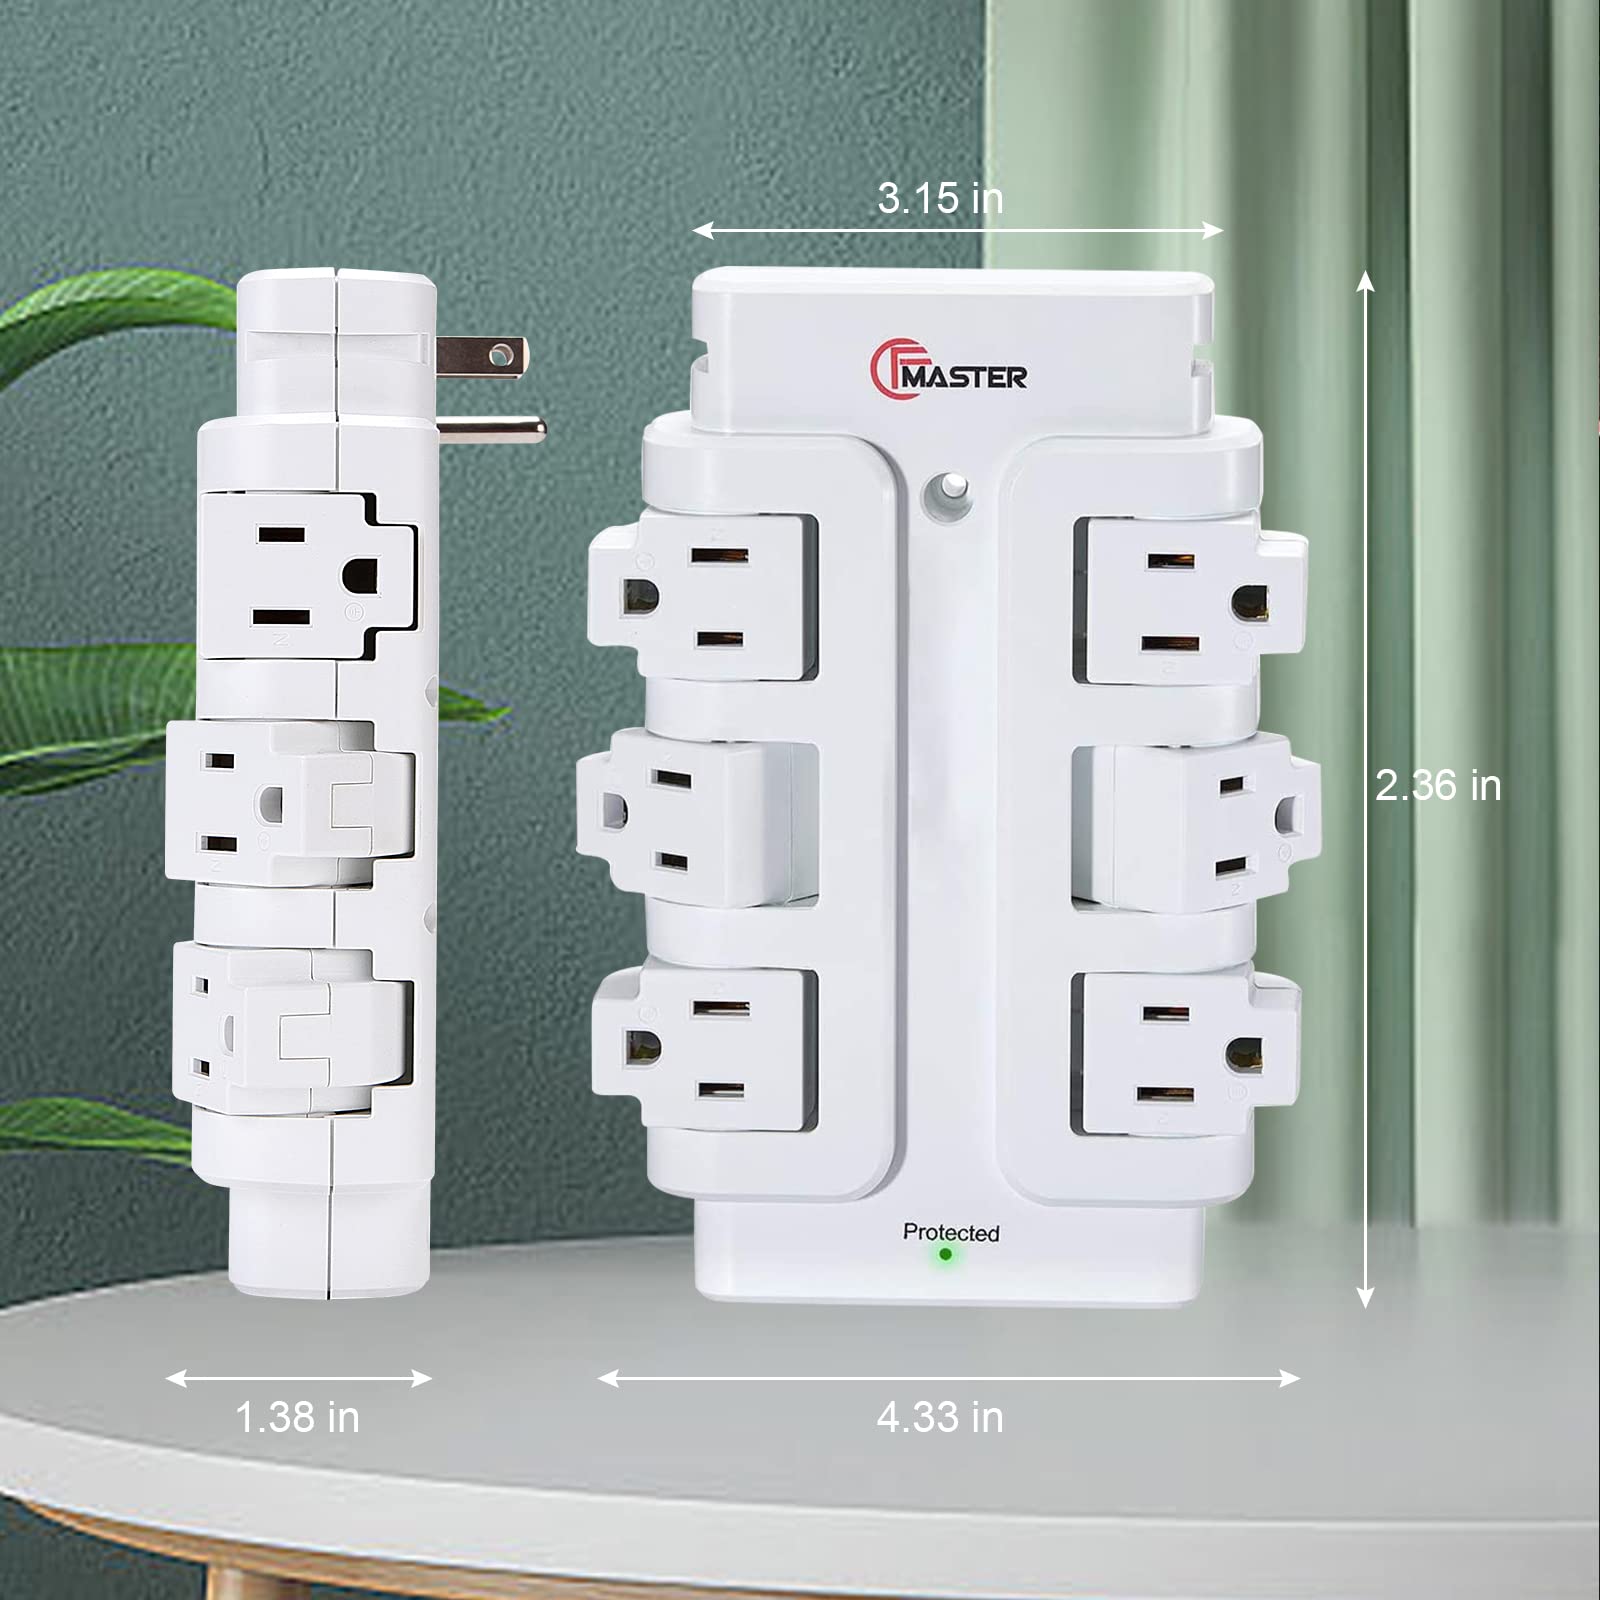 Outlet Extender, 6 90° Rotating Plugs, 15A, 125V, 1875W, 540J, Power Strip, Surge Protector Power Strip for Travel Hotel Office Home Wall Surge Protector, White